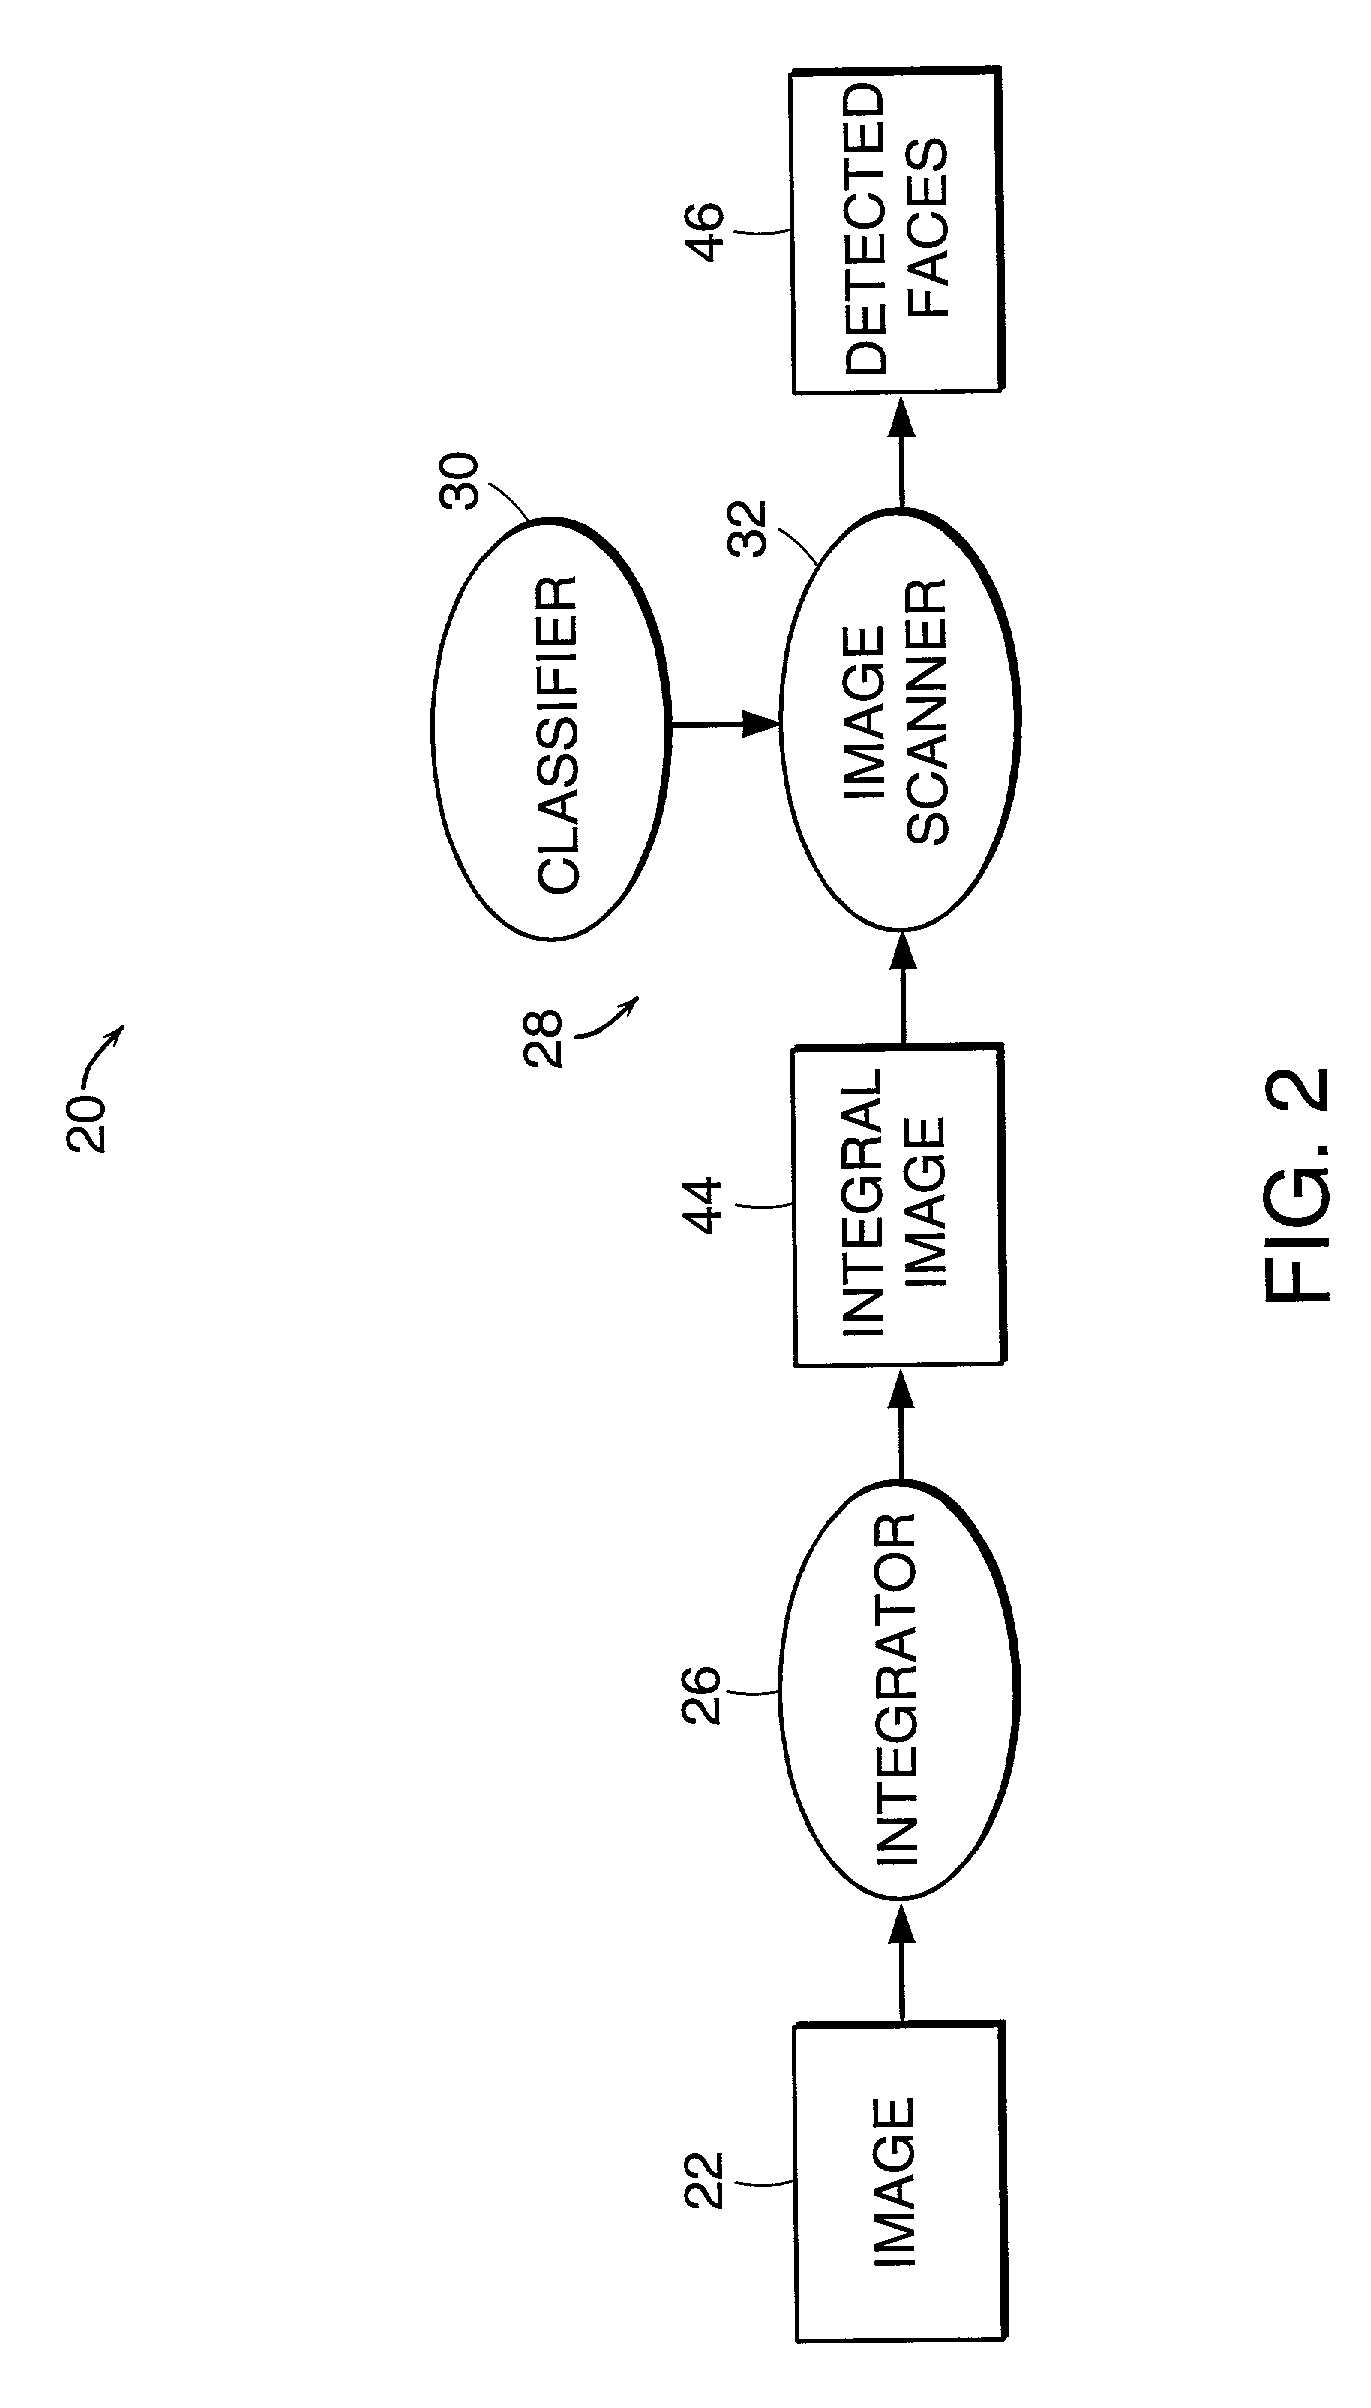 Method and system for object detection in digital images